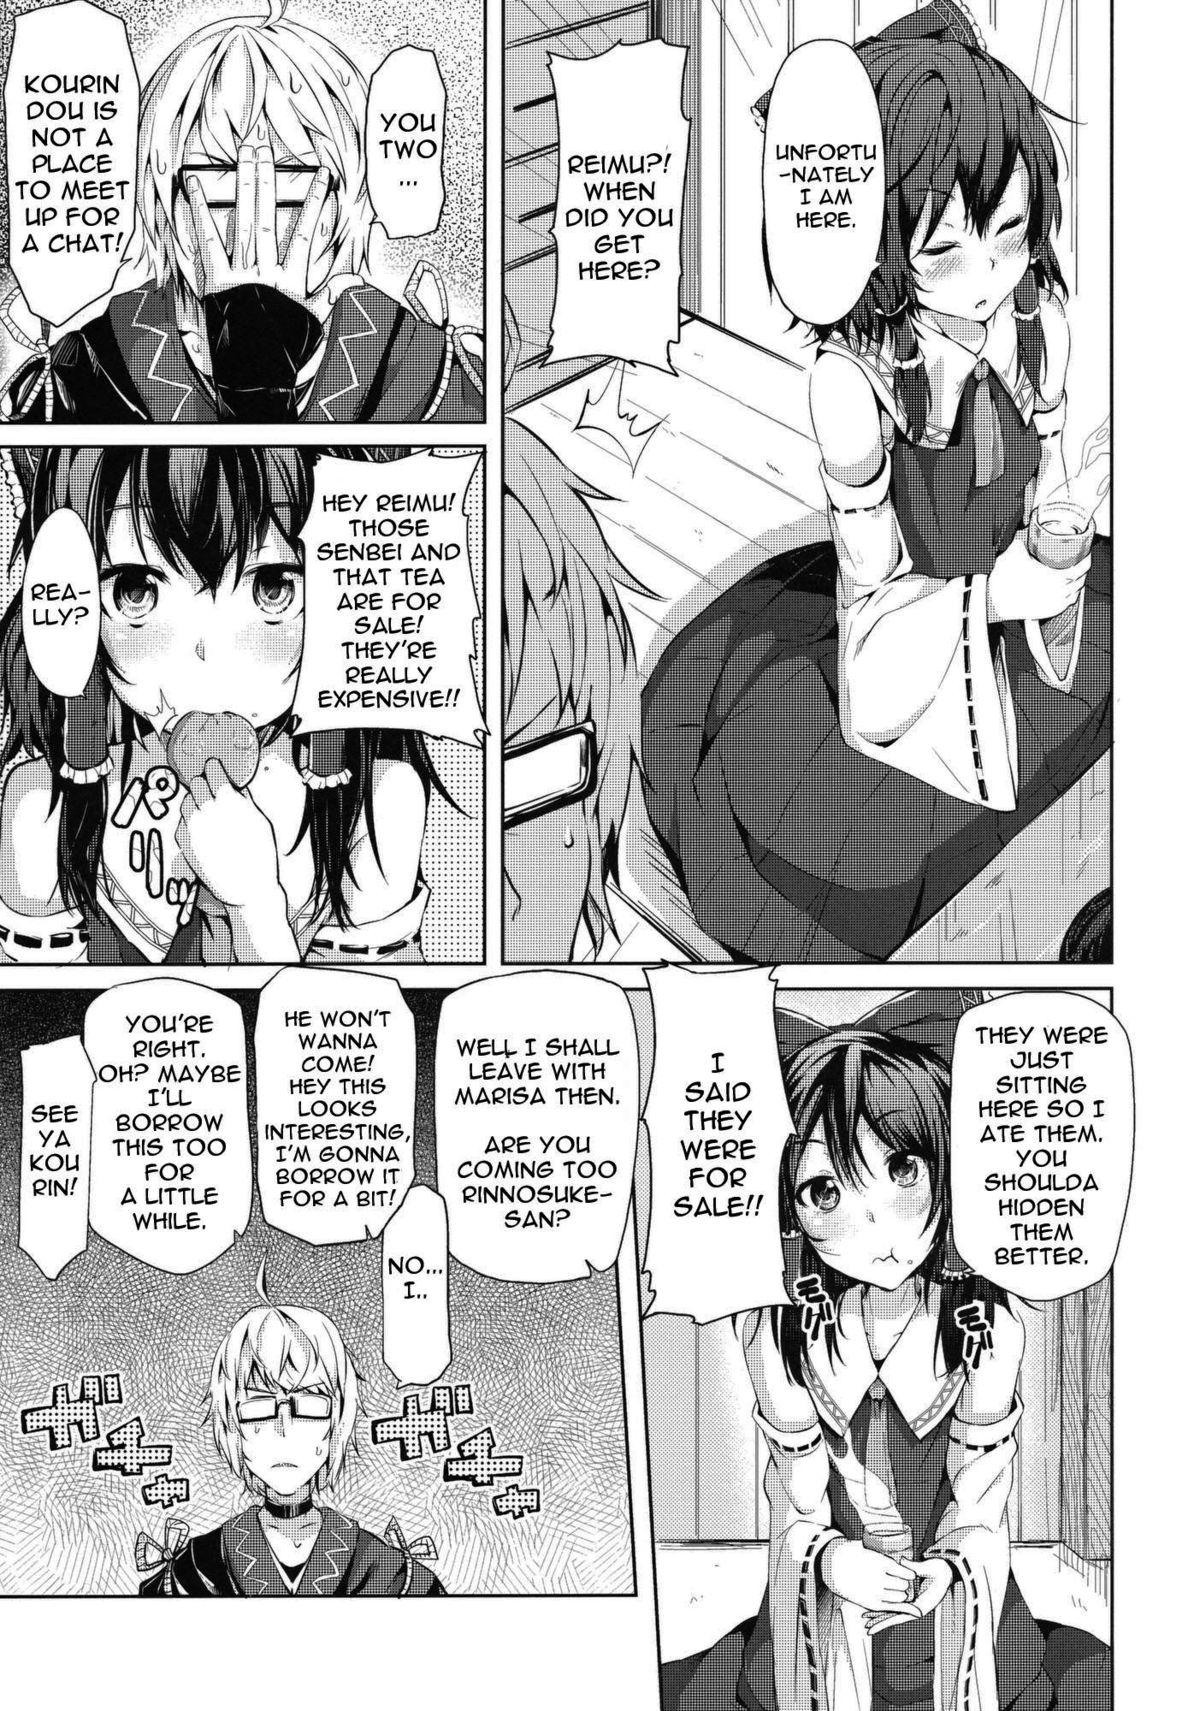 Hardcore Zutto Kourin no Turn! Turn 1 me | It's Always Kourin's Turn - First Turn - Touhou project Cousin - Page 6